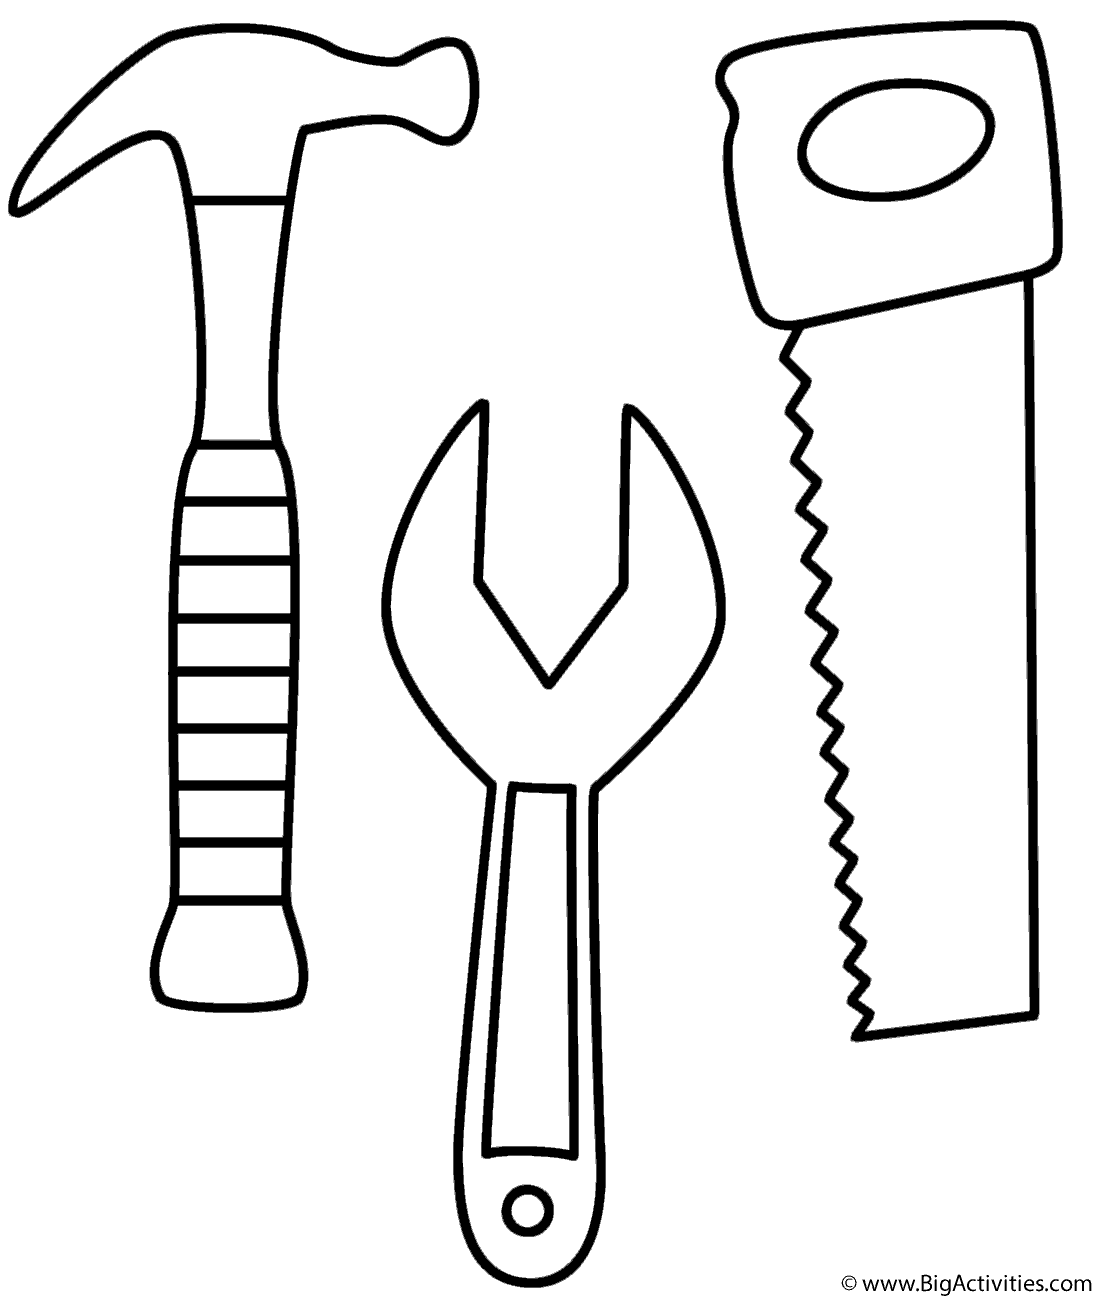 Hammer Saw and Wrench Coloring Page (Tools)